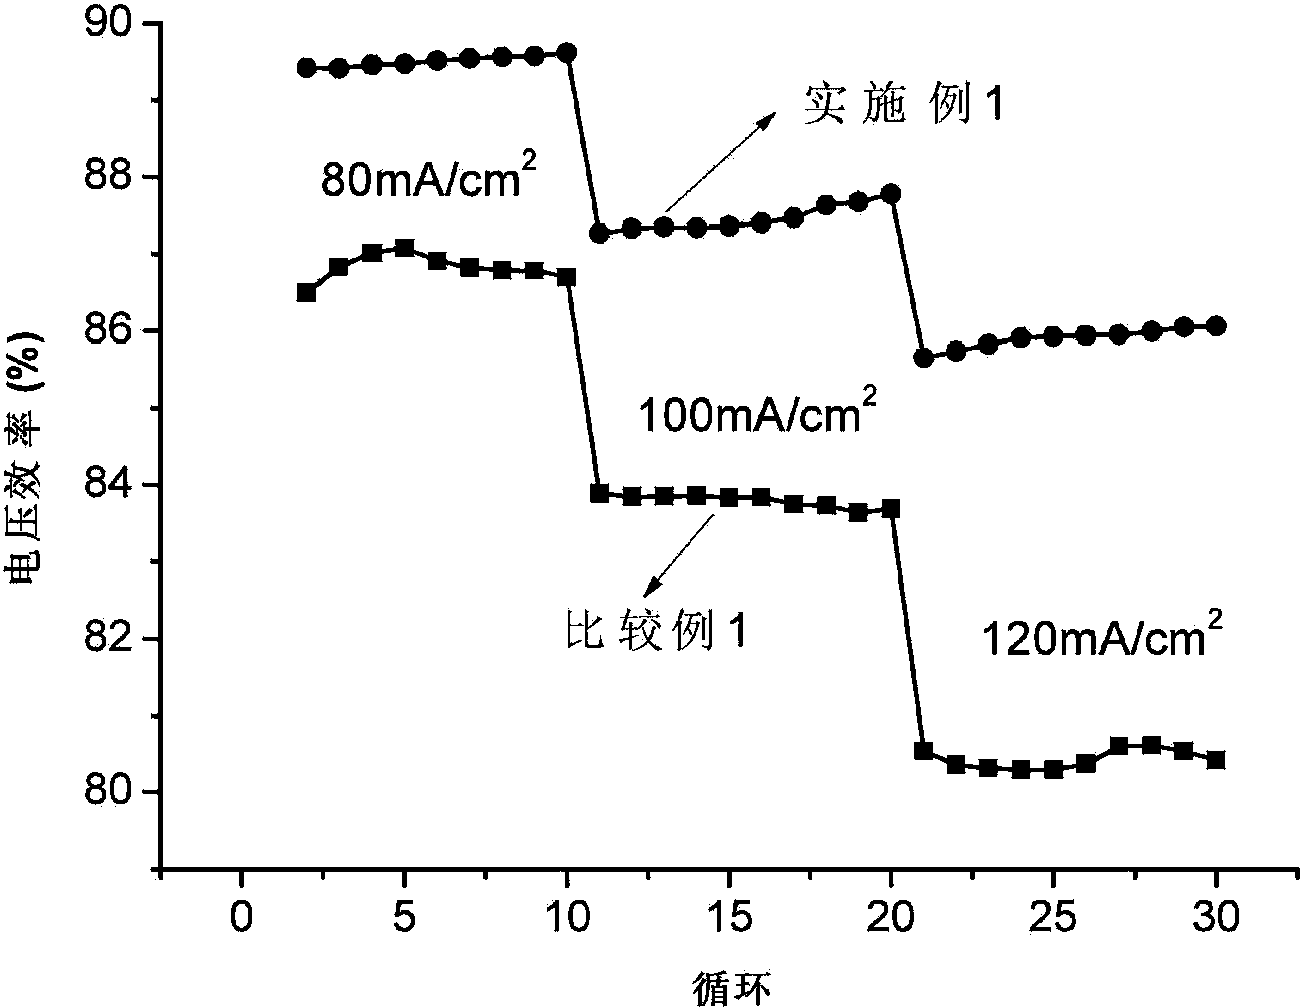 Difunctional negative electrode and its application as all-vanadium redox energy storage battery negative electrode